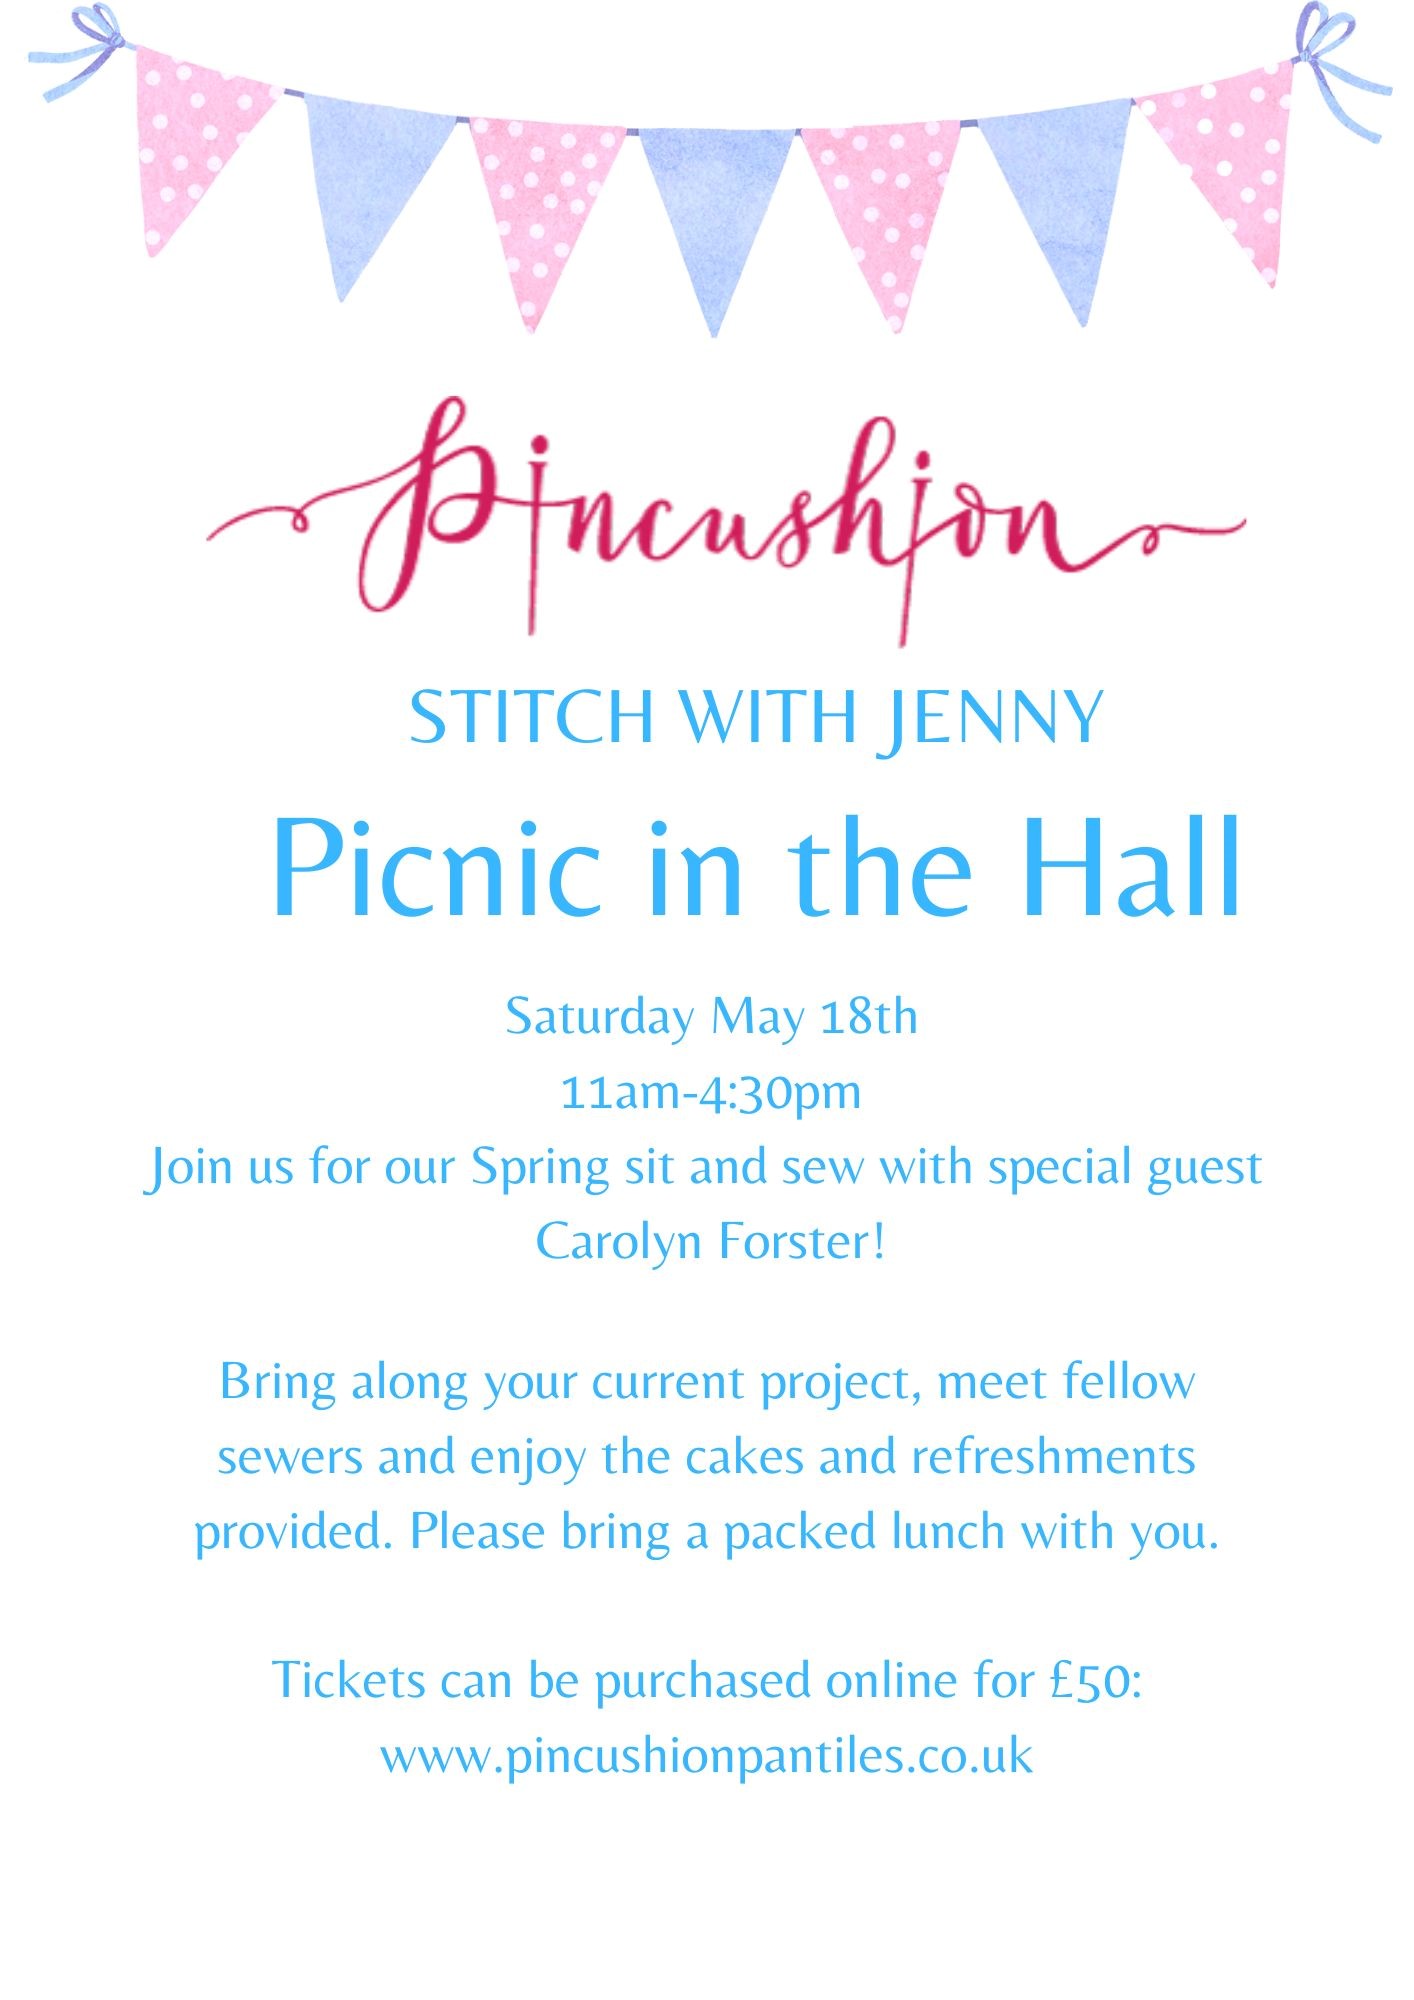 Picnic in the Hall flyer